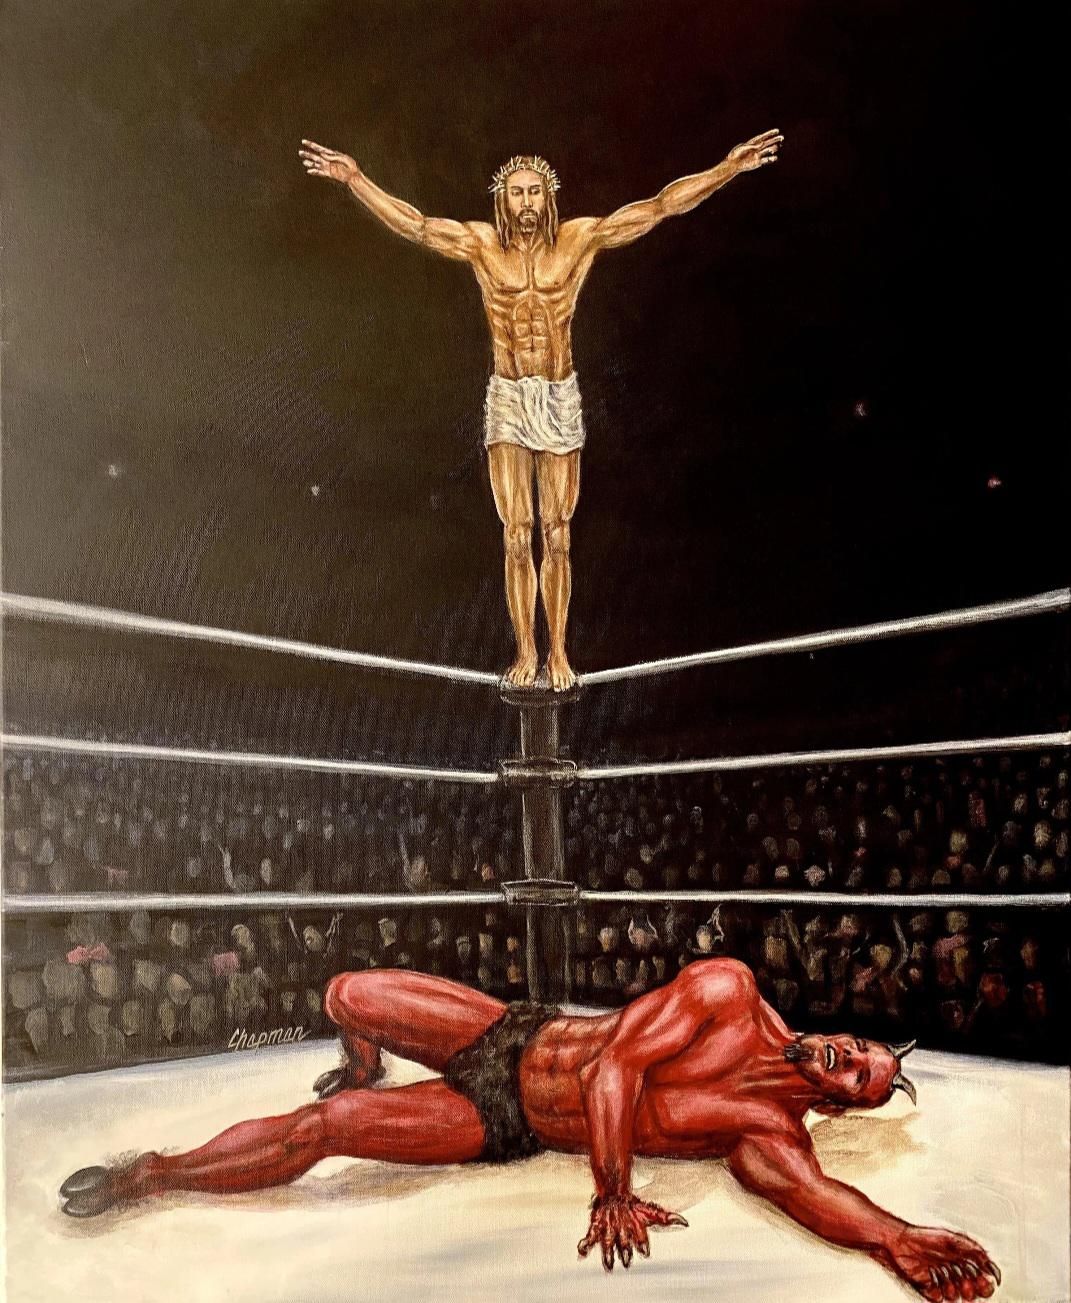 Jesus H. Christ prepares to deliver the "People's Elbow" on Satan in Wrestlemania 13